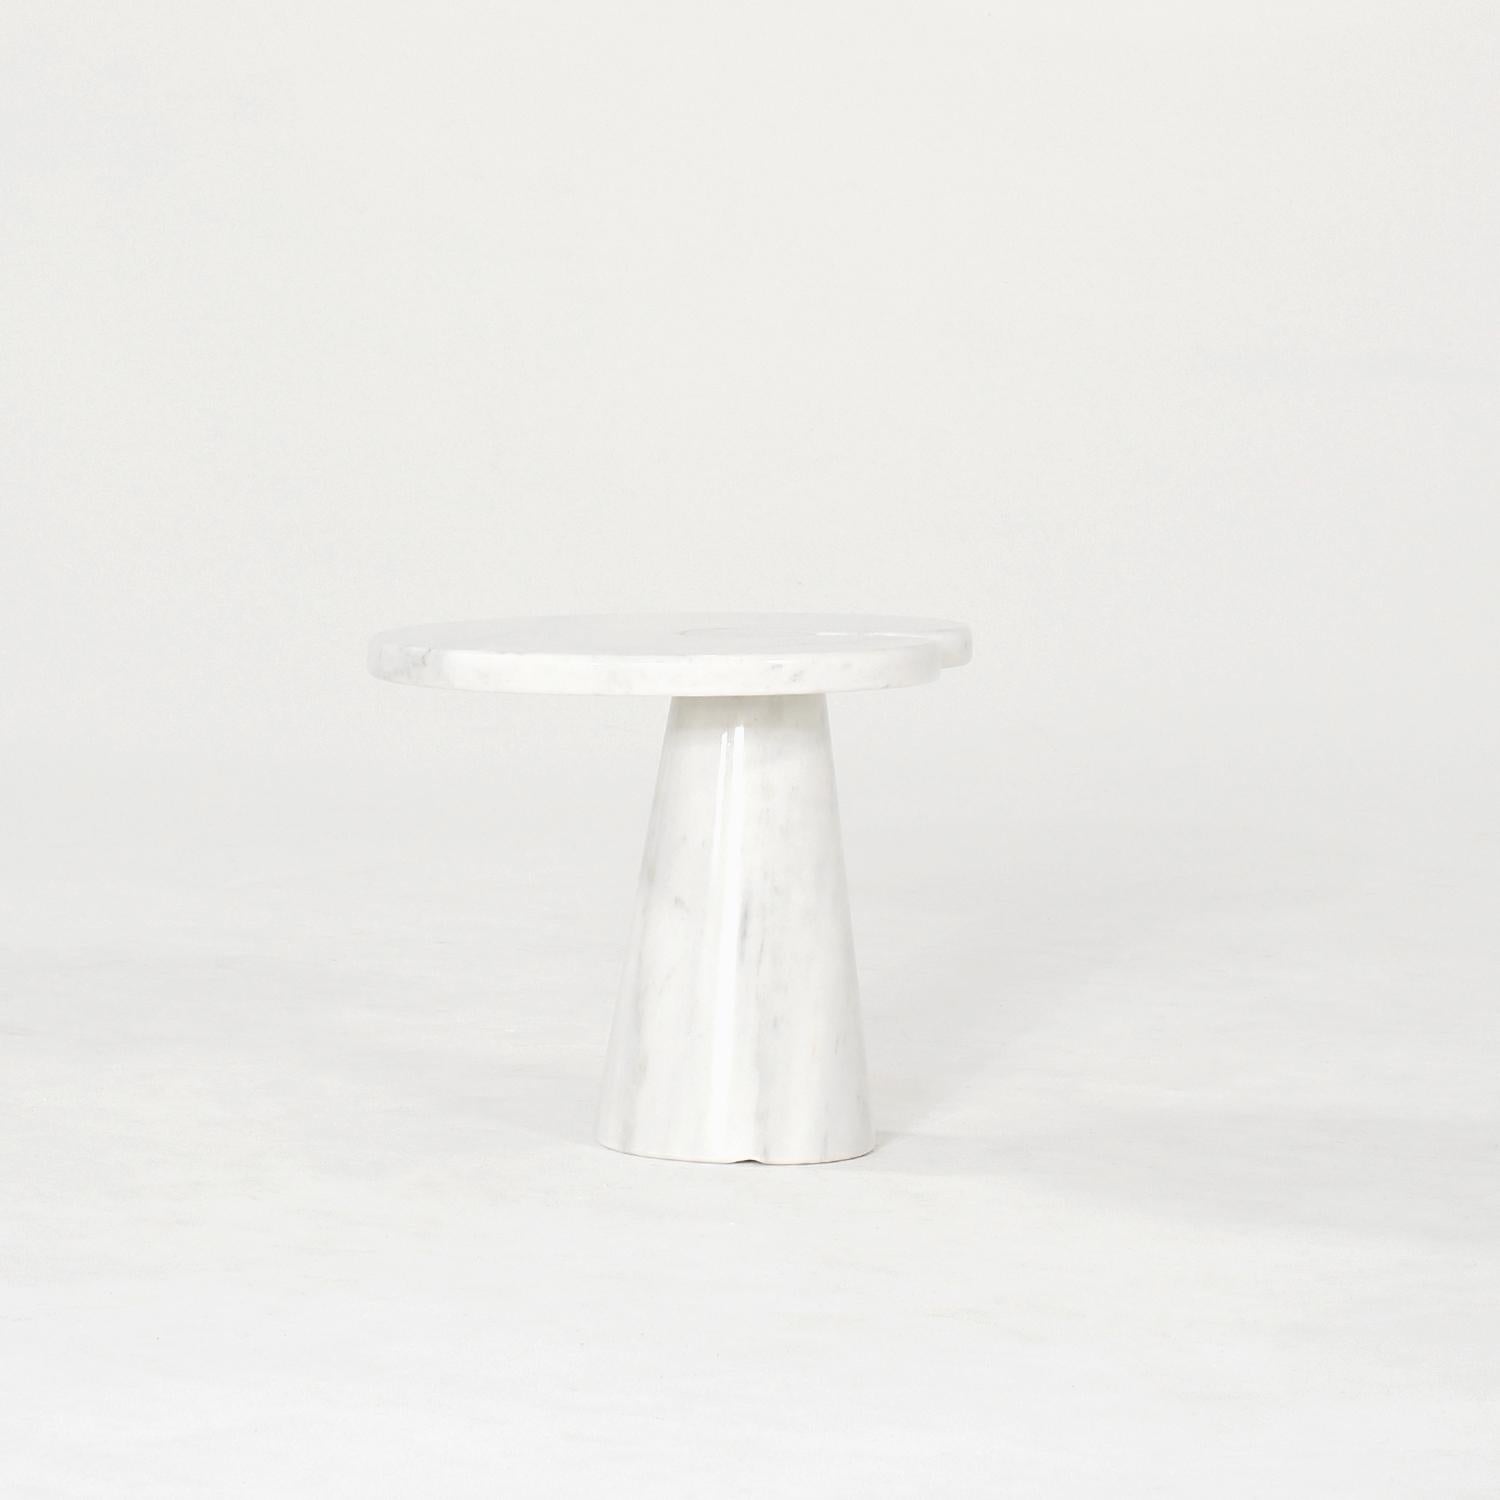 20th Century Italian Pair of Marble Side Tables by Angelo Mangiarotti & Skipper For Sale 4